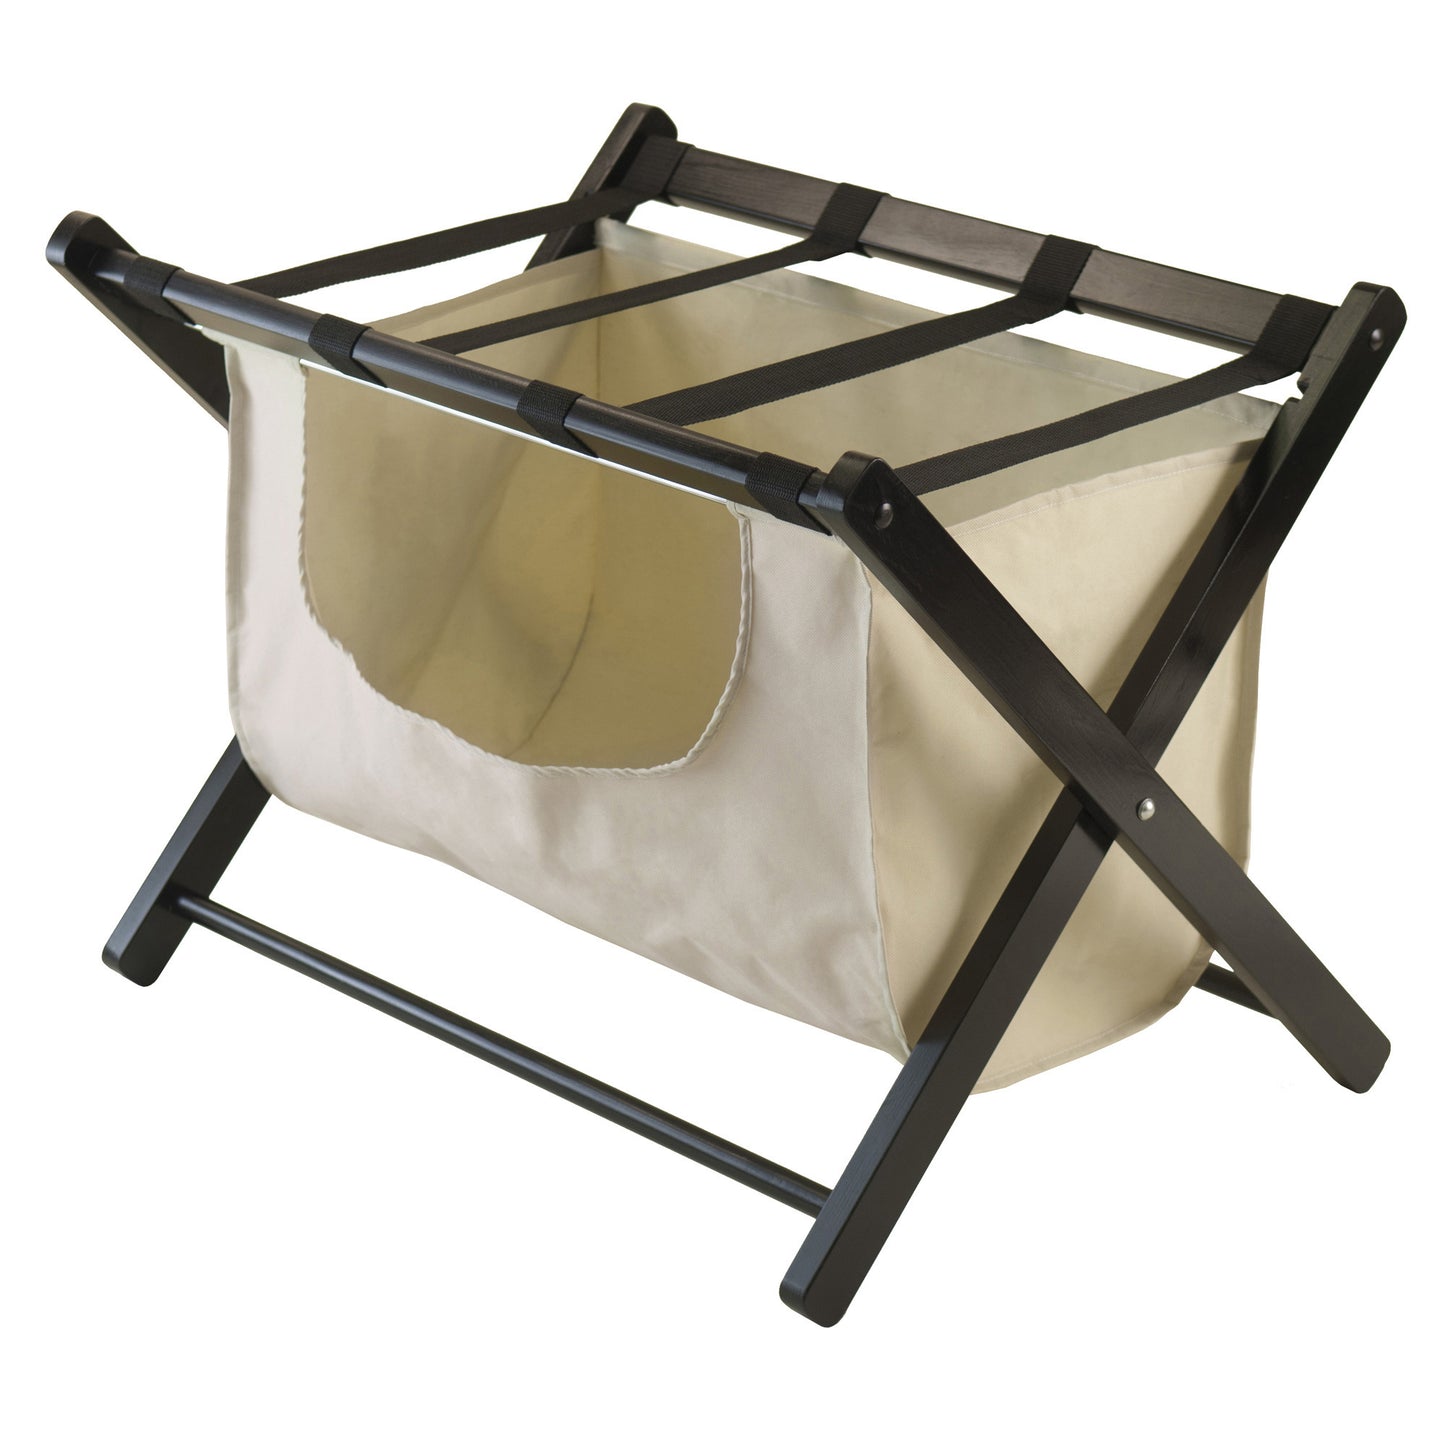 Dora Luggage Rack with removable fabric basket